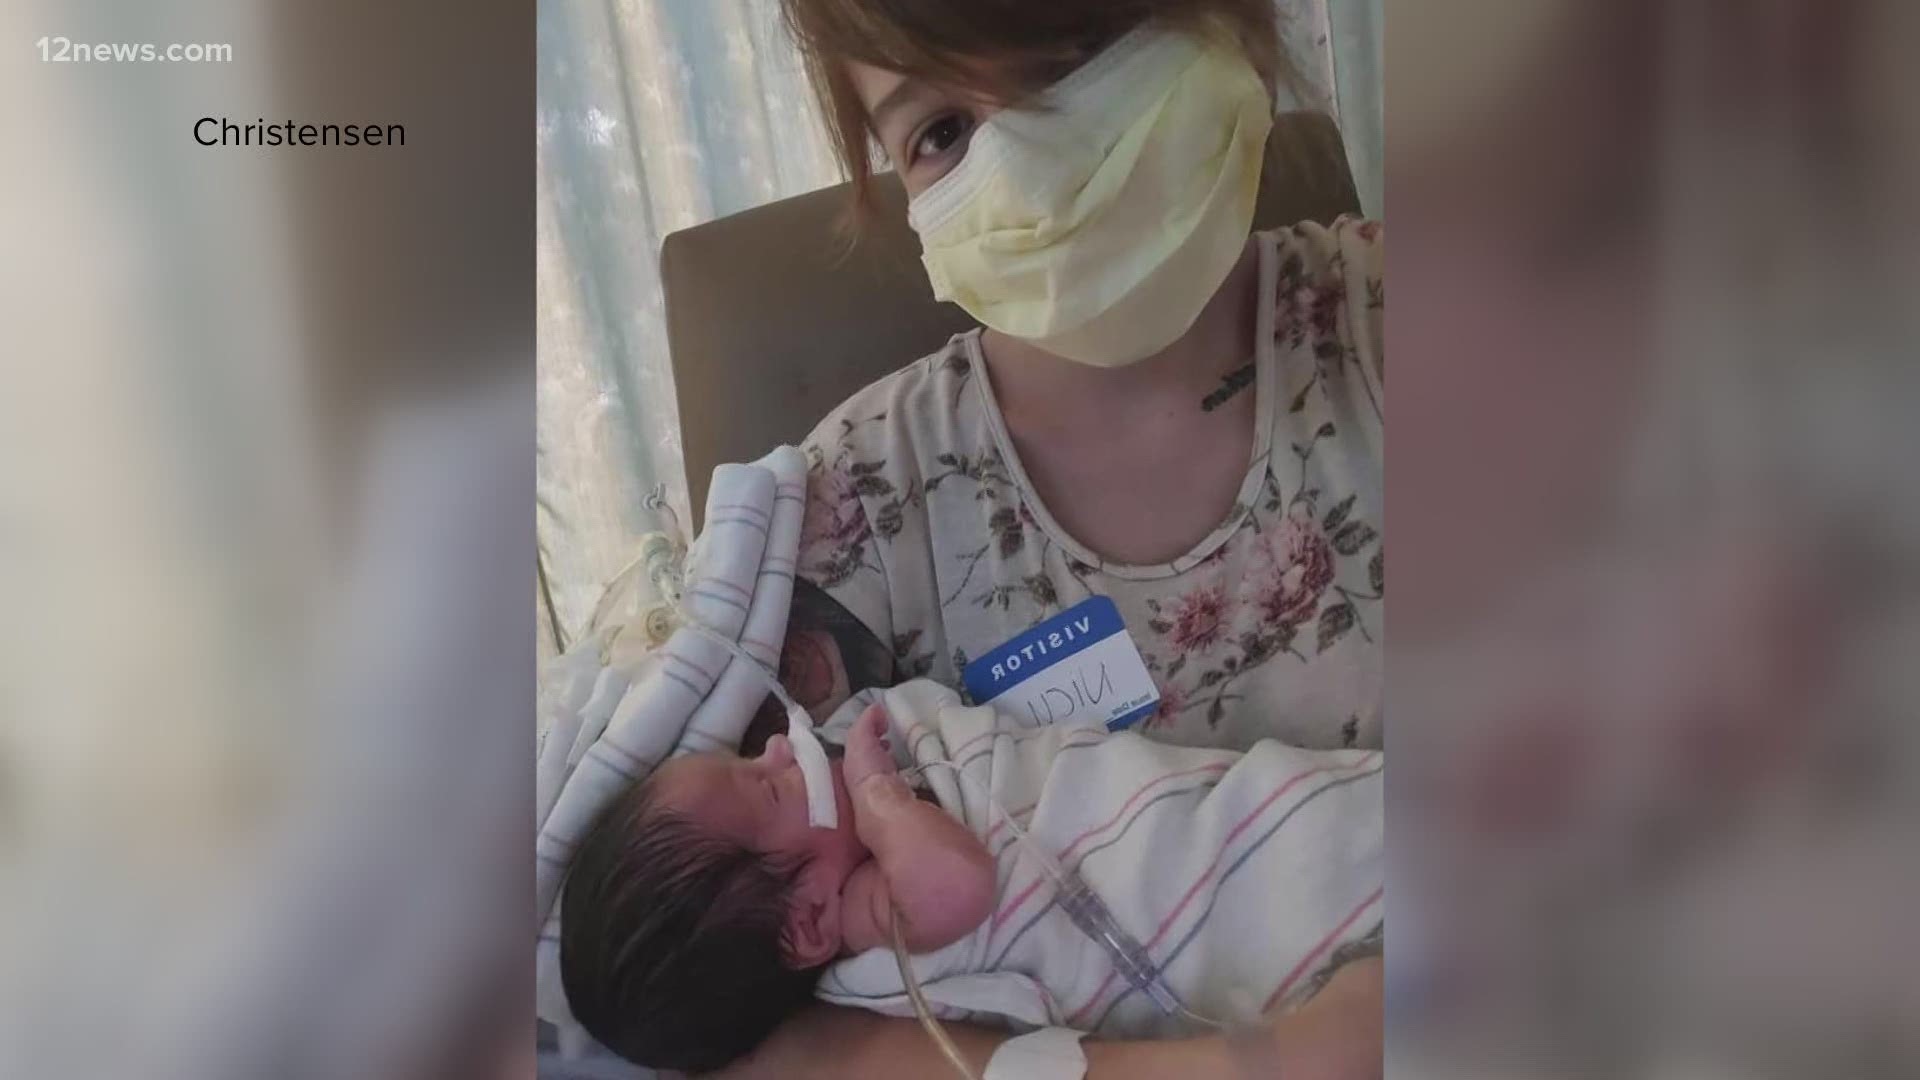 An East Valley mom has been blown away by the kindness of a neighbor she had never met. She had just delivered her baby boy early and needed some immediate help.